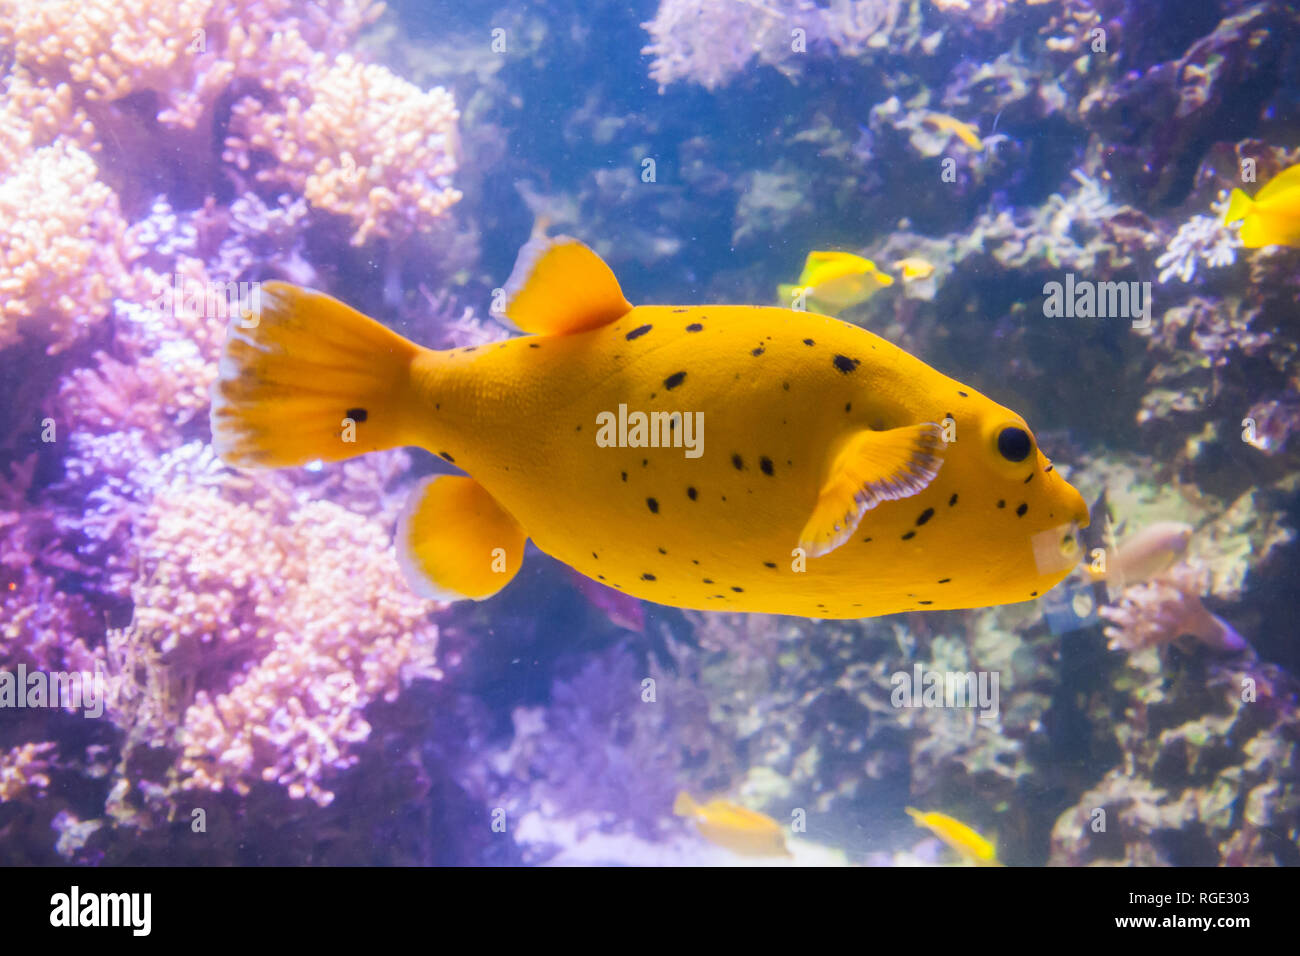 Yellow Blackspotted Puffer Or Dog-faced Puffer Fish - Arothron Nigropunctatus. Wonderful and beautiful underwater world with corals and tropical fish. Stock Photo